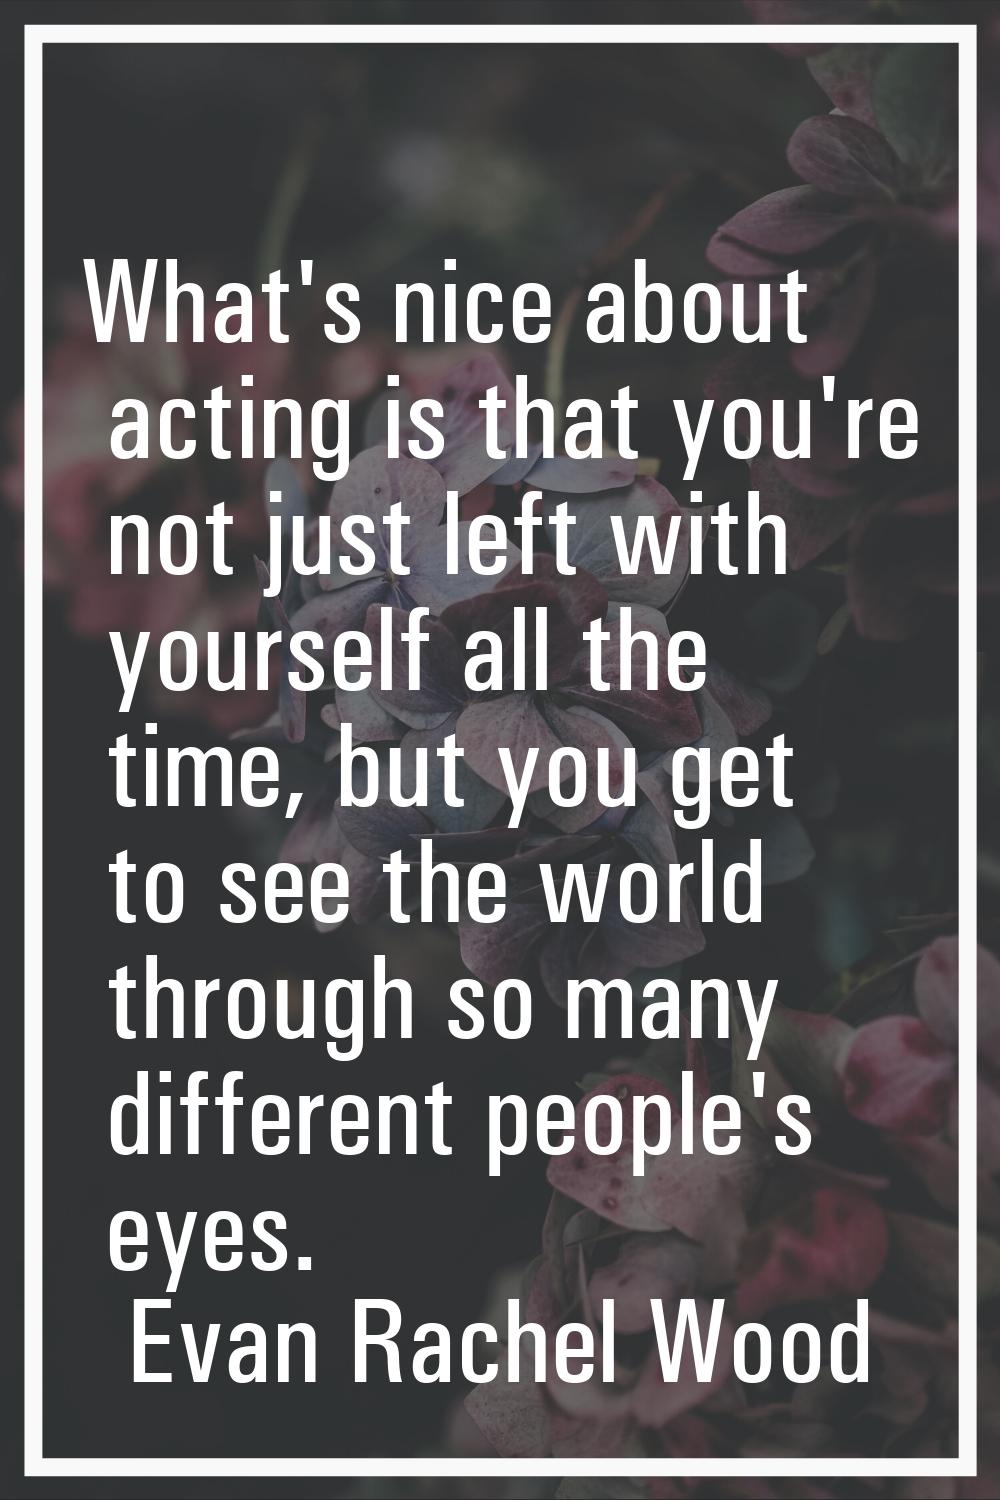 What's nice about acting is that you're not just left with yourself all the time, but you get to se